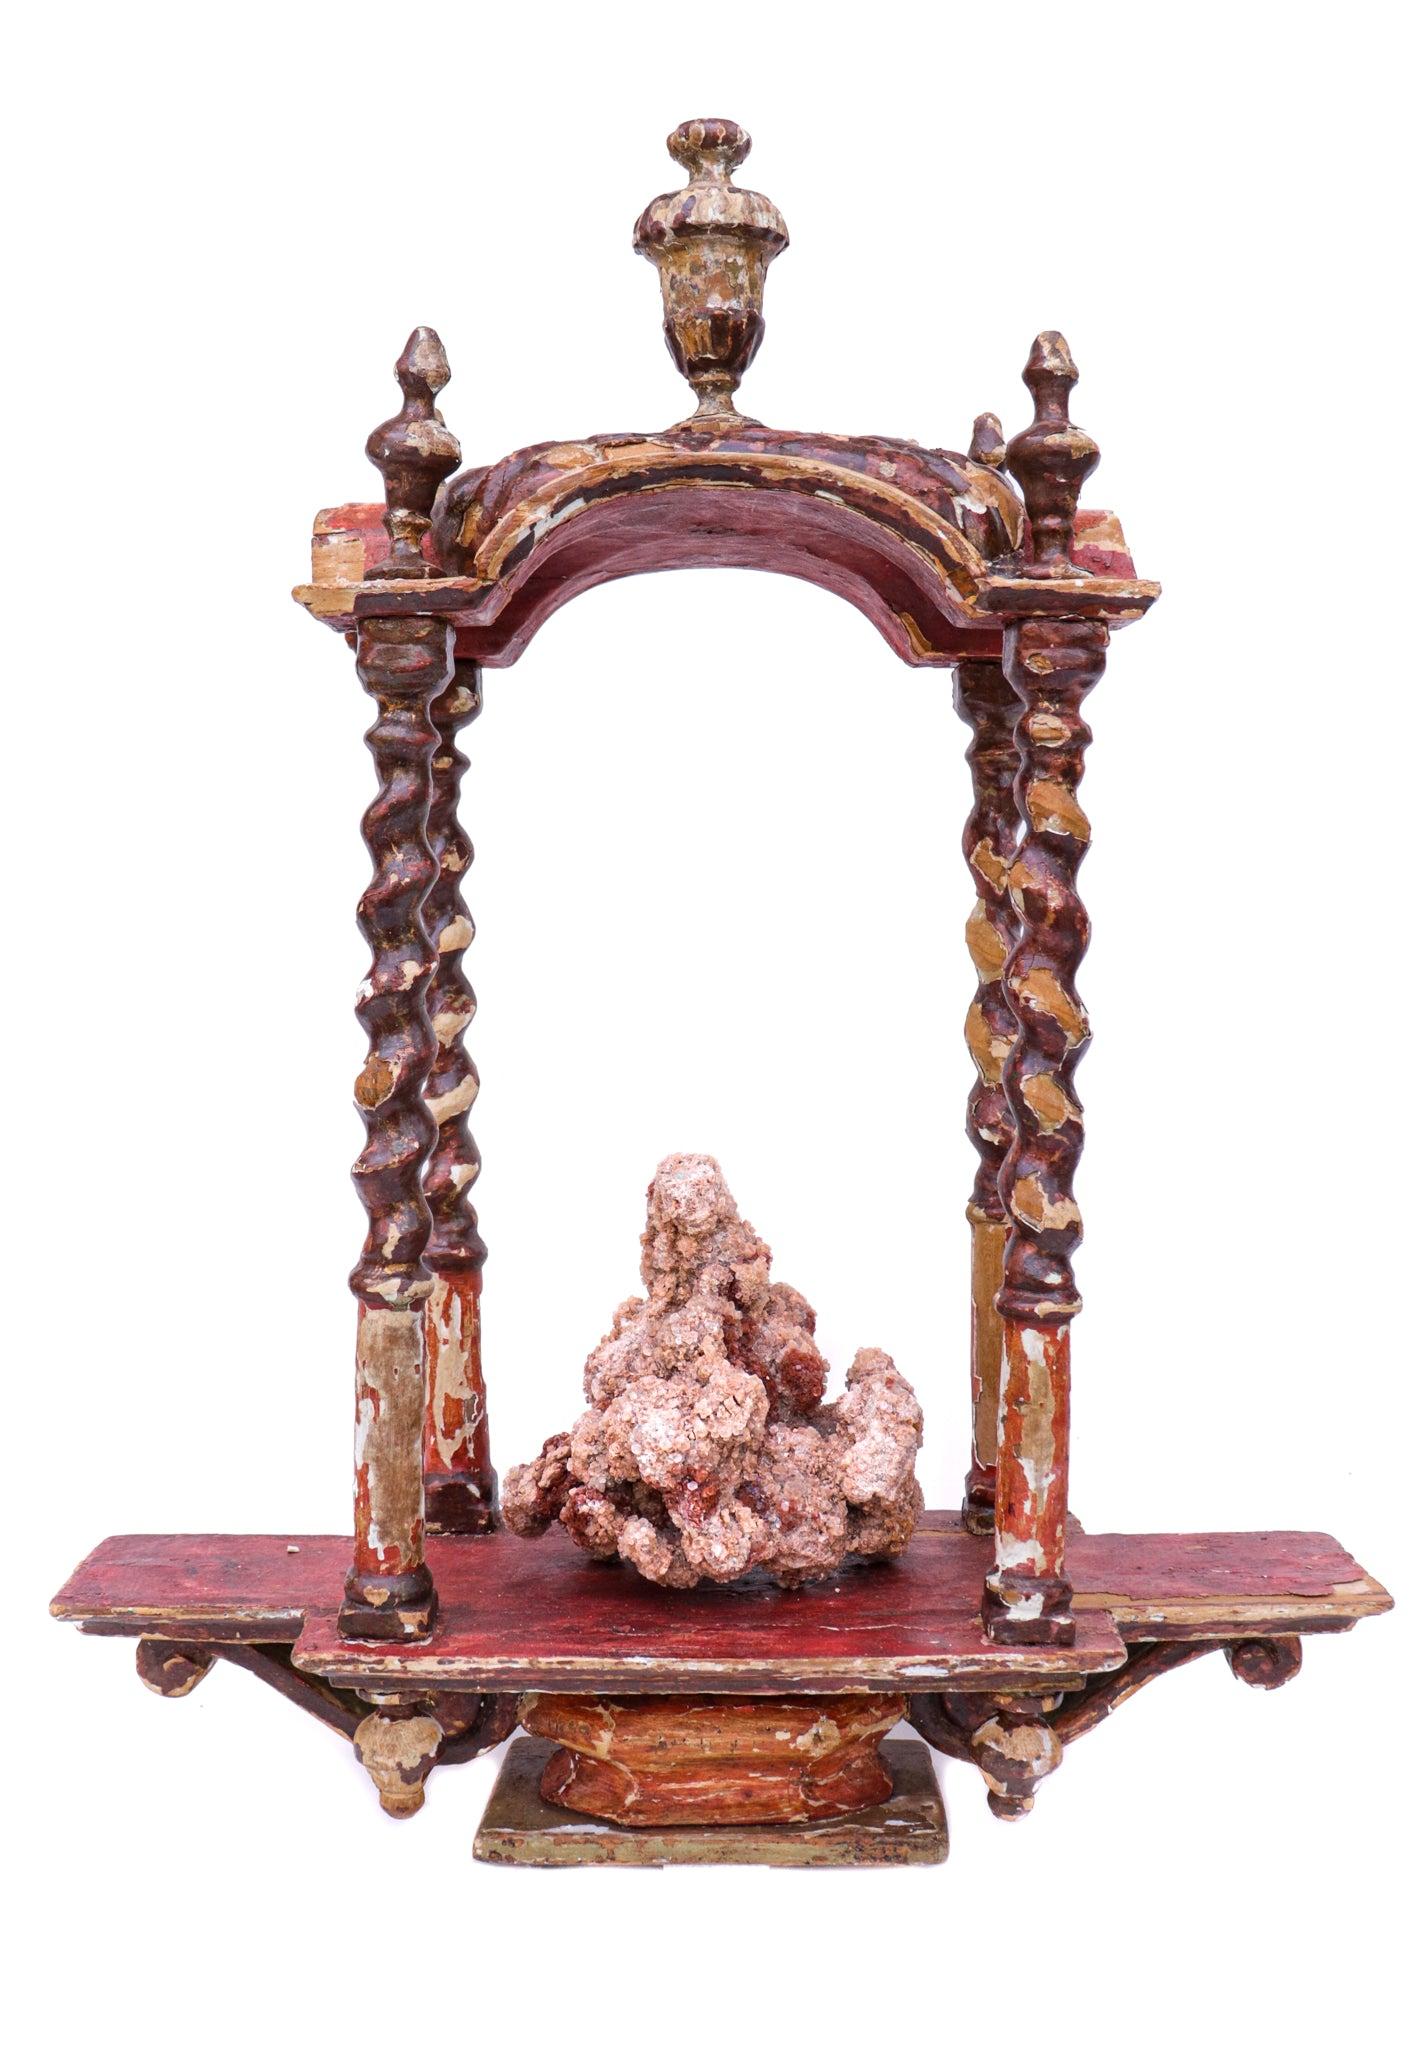 18th Century Italian tabernacle with aragonite. It is hand-painted and carved with scroll details and has been kept in its original condition. The tabernacle was originally used in a historic Italian church as a 